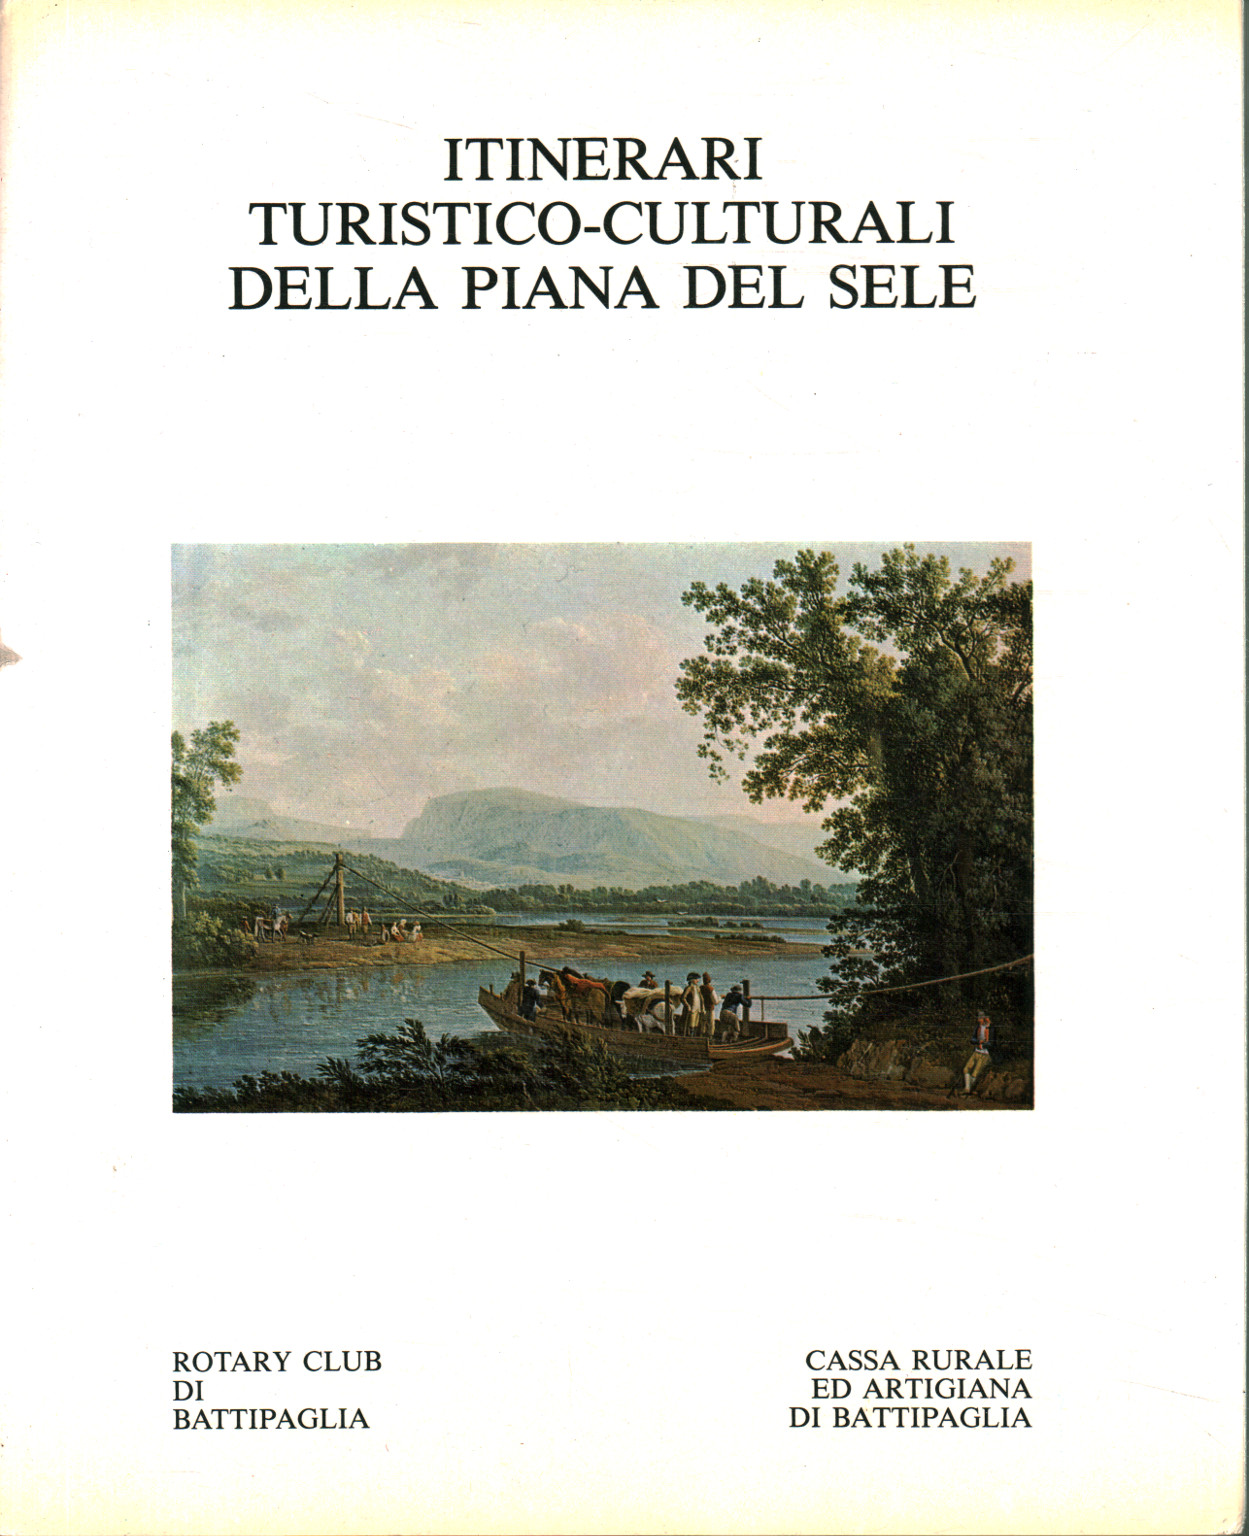 Tourist-cultural itineraries of the Plain